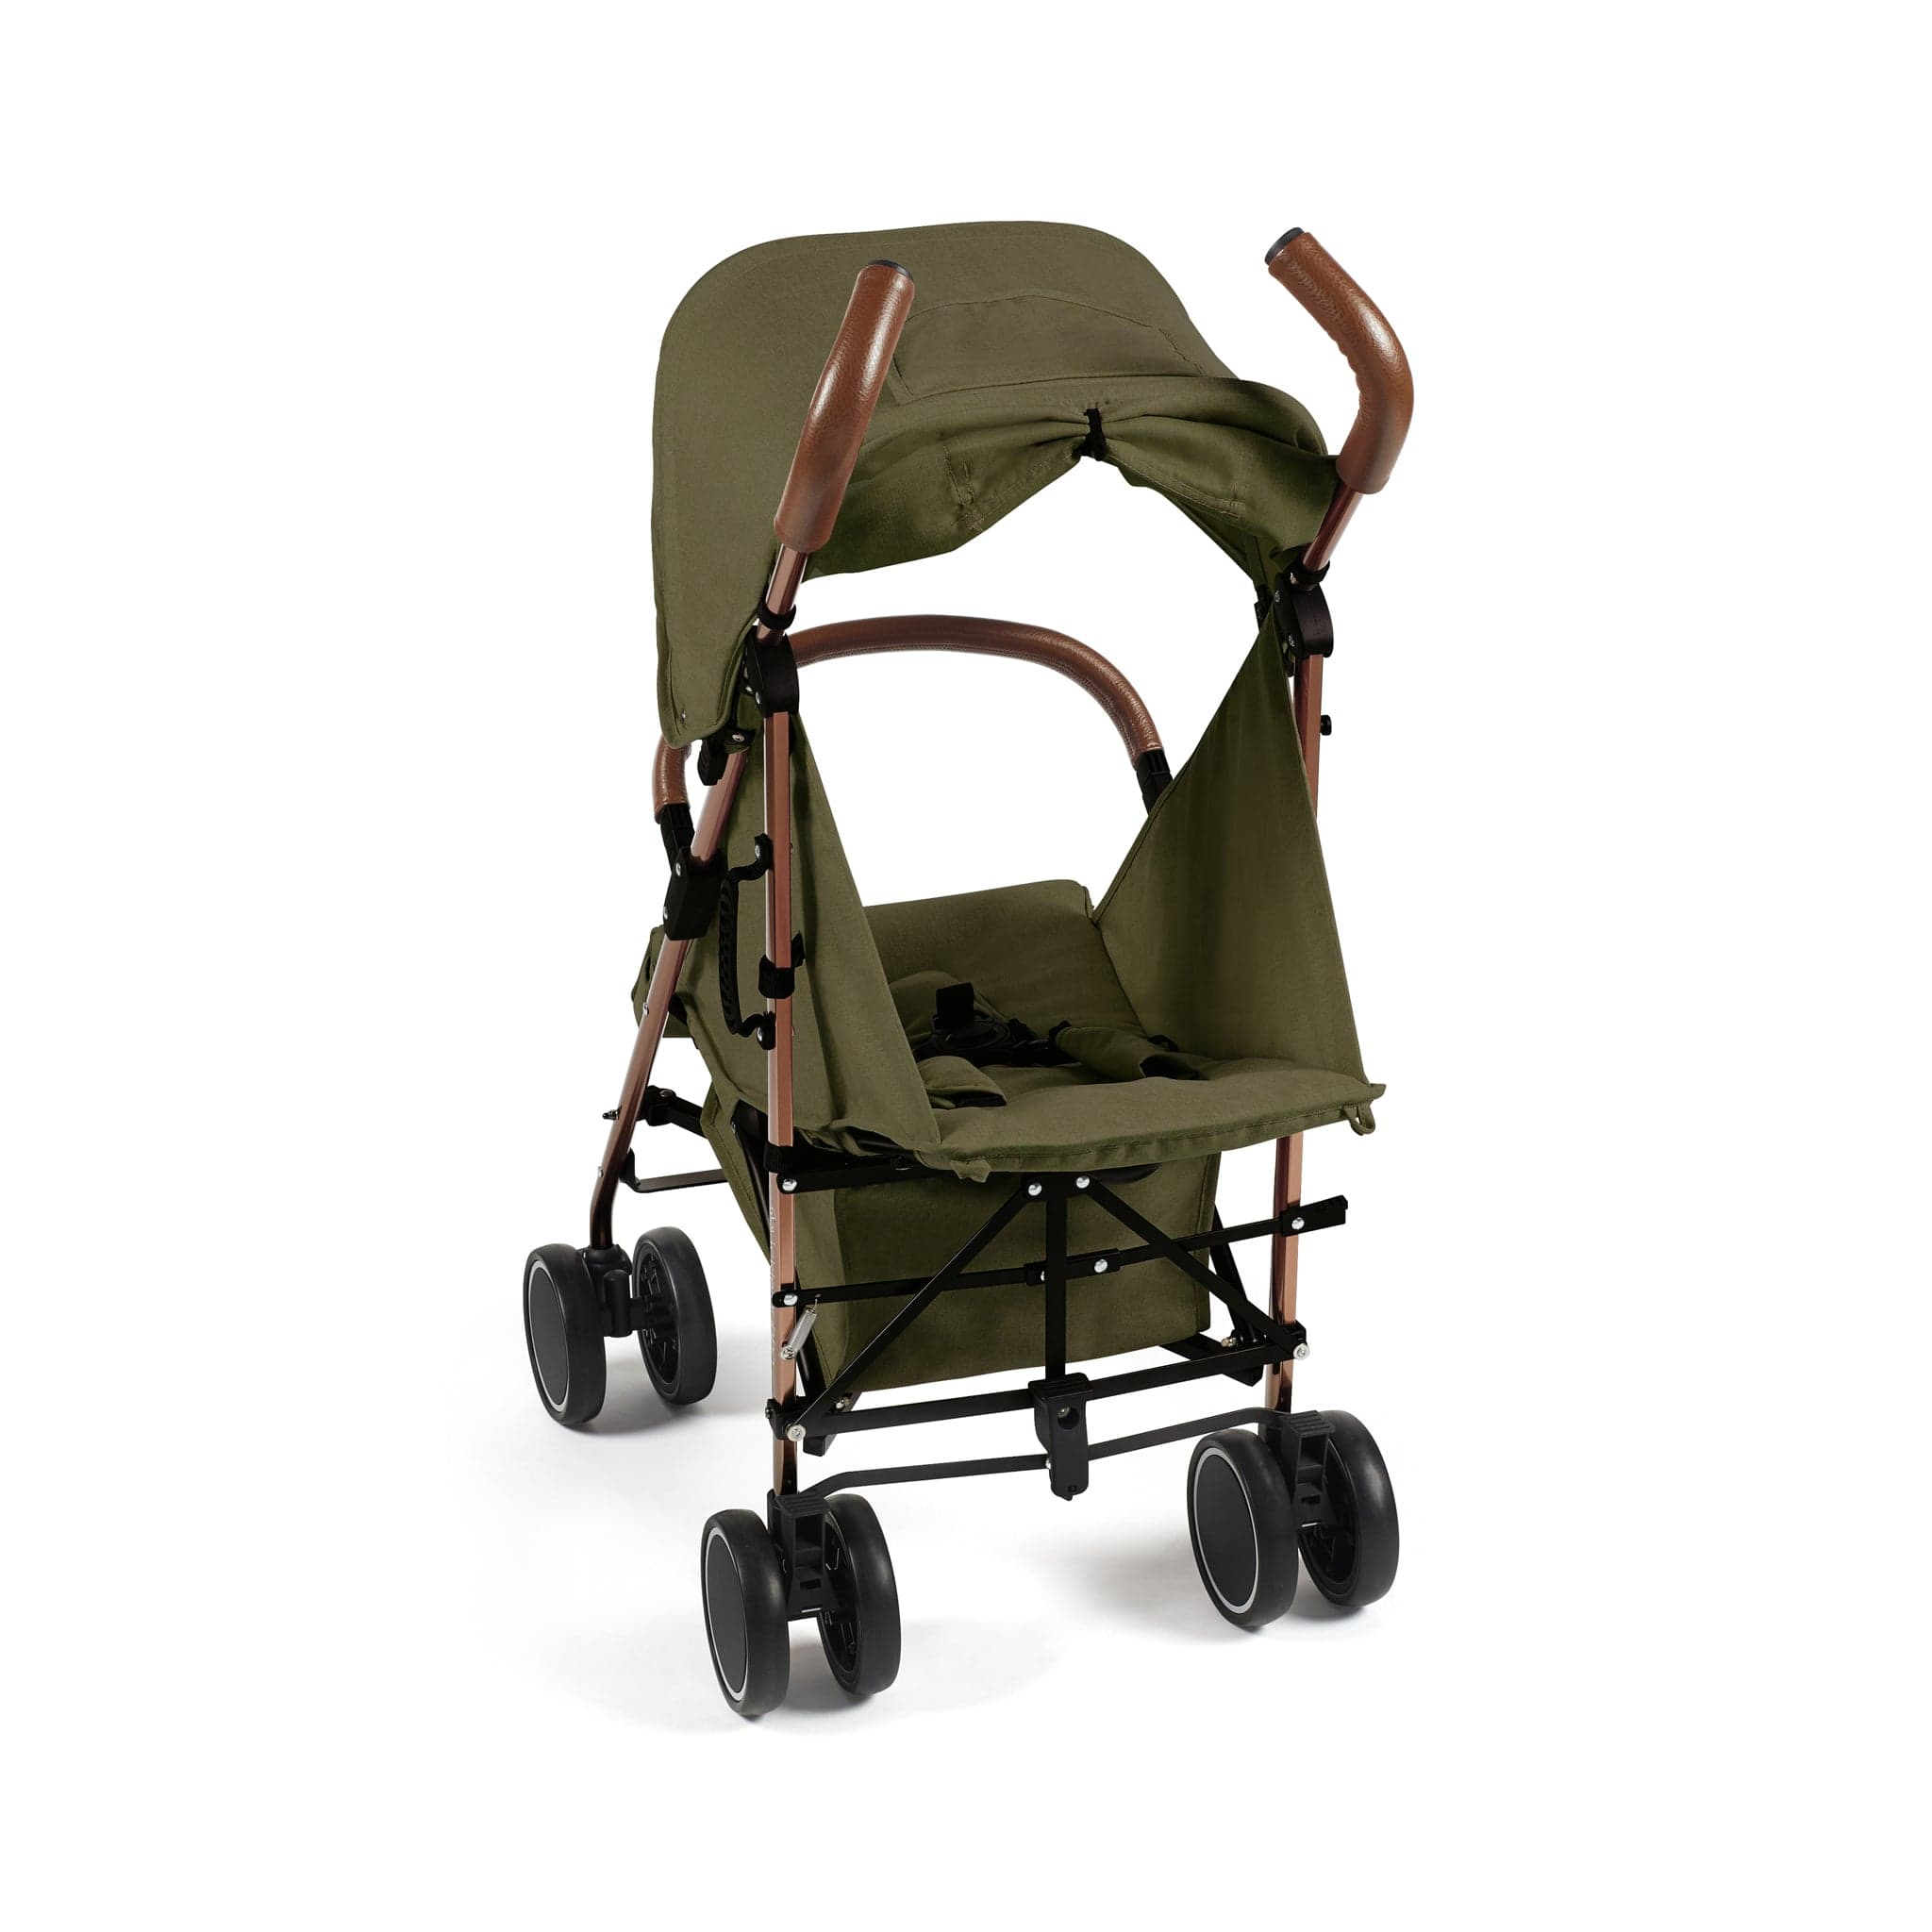 Ickle Bubba Discovery Stroller Rose Gold/Khaki Pushchairs & Buggies 15-002-100-045 0700355999041